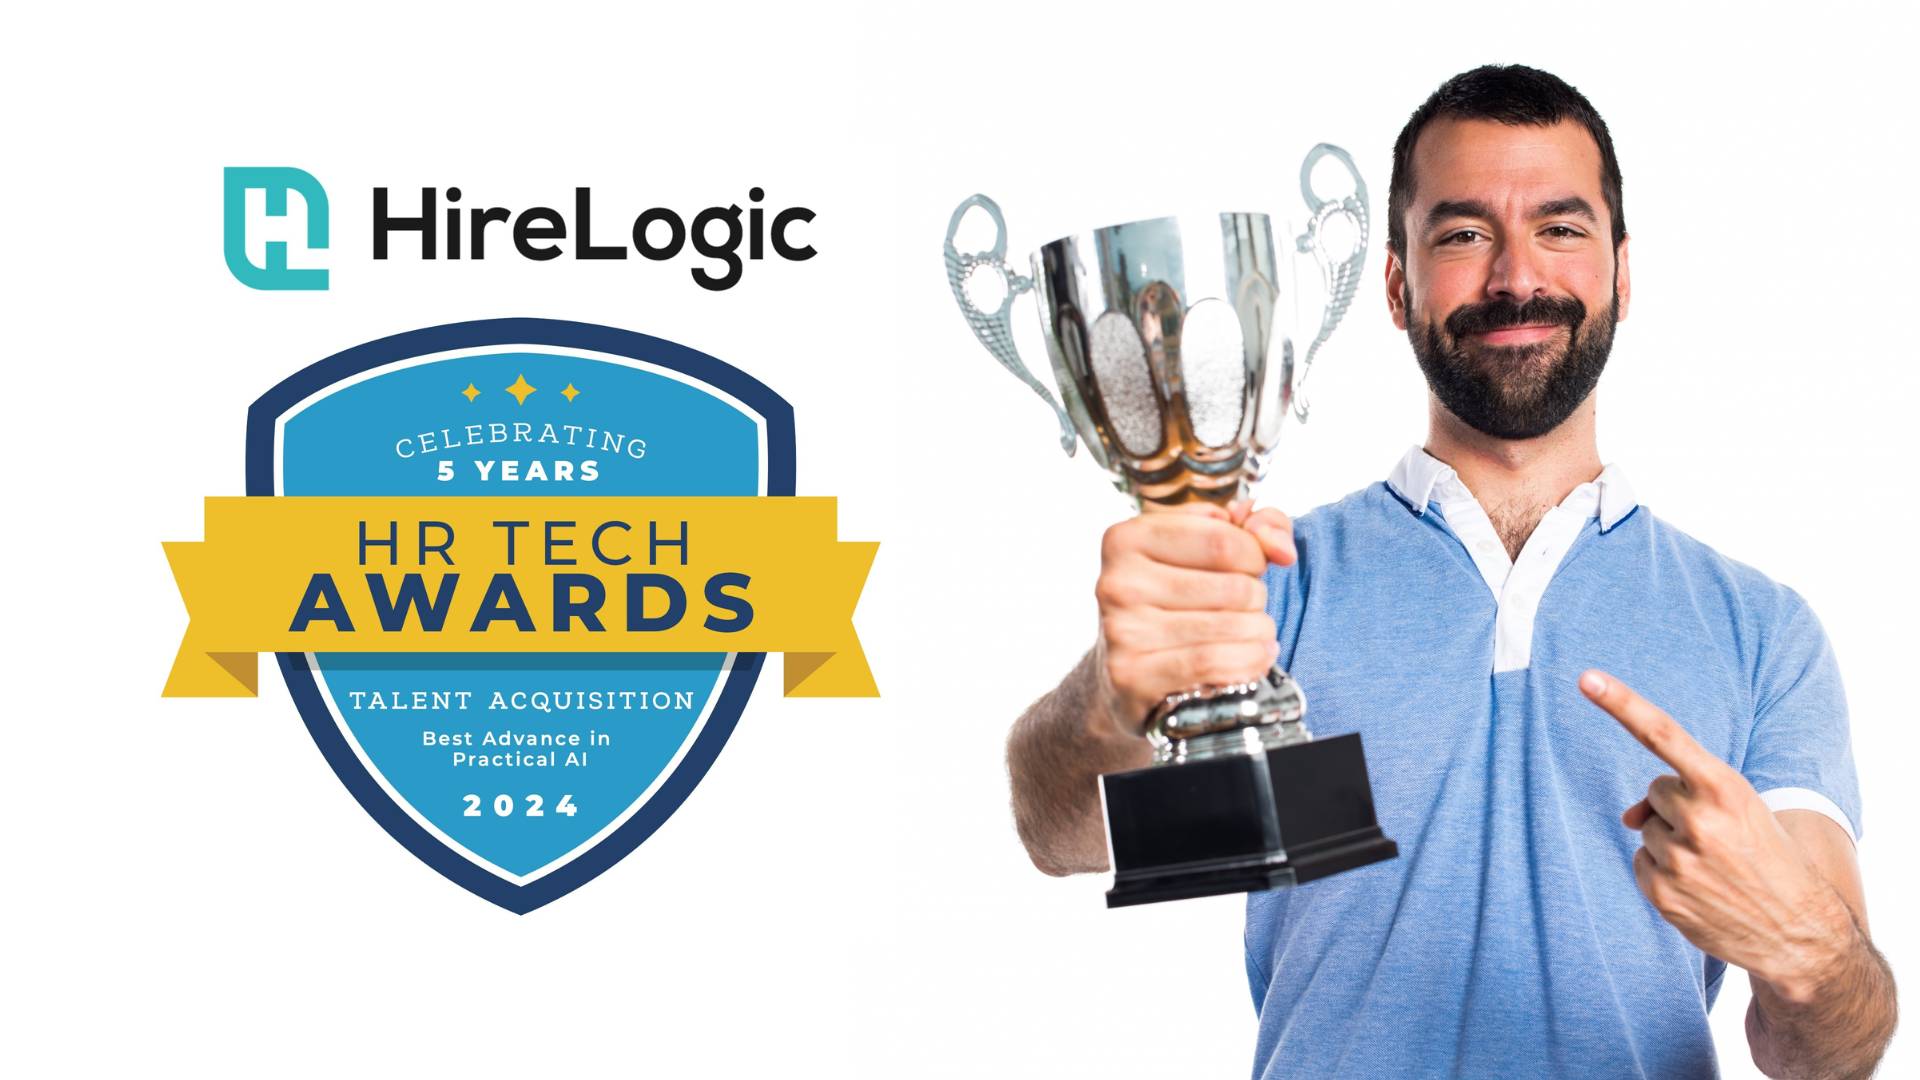 HireLogic Wins "Best Advance in Practical AI" Award at 5th Annual HR Tech Awards